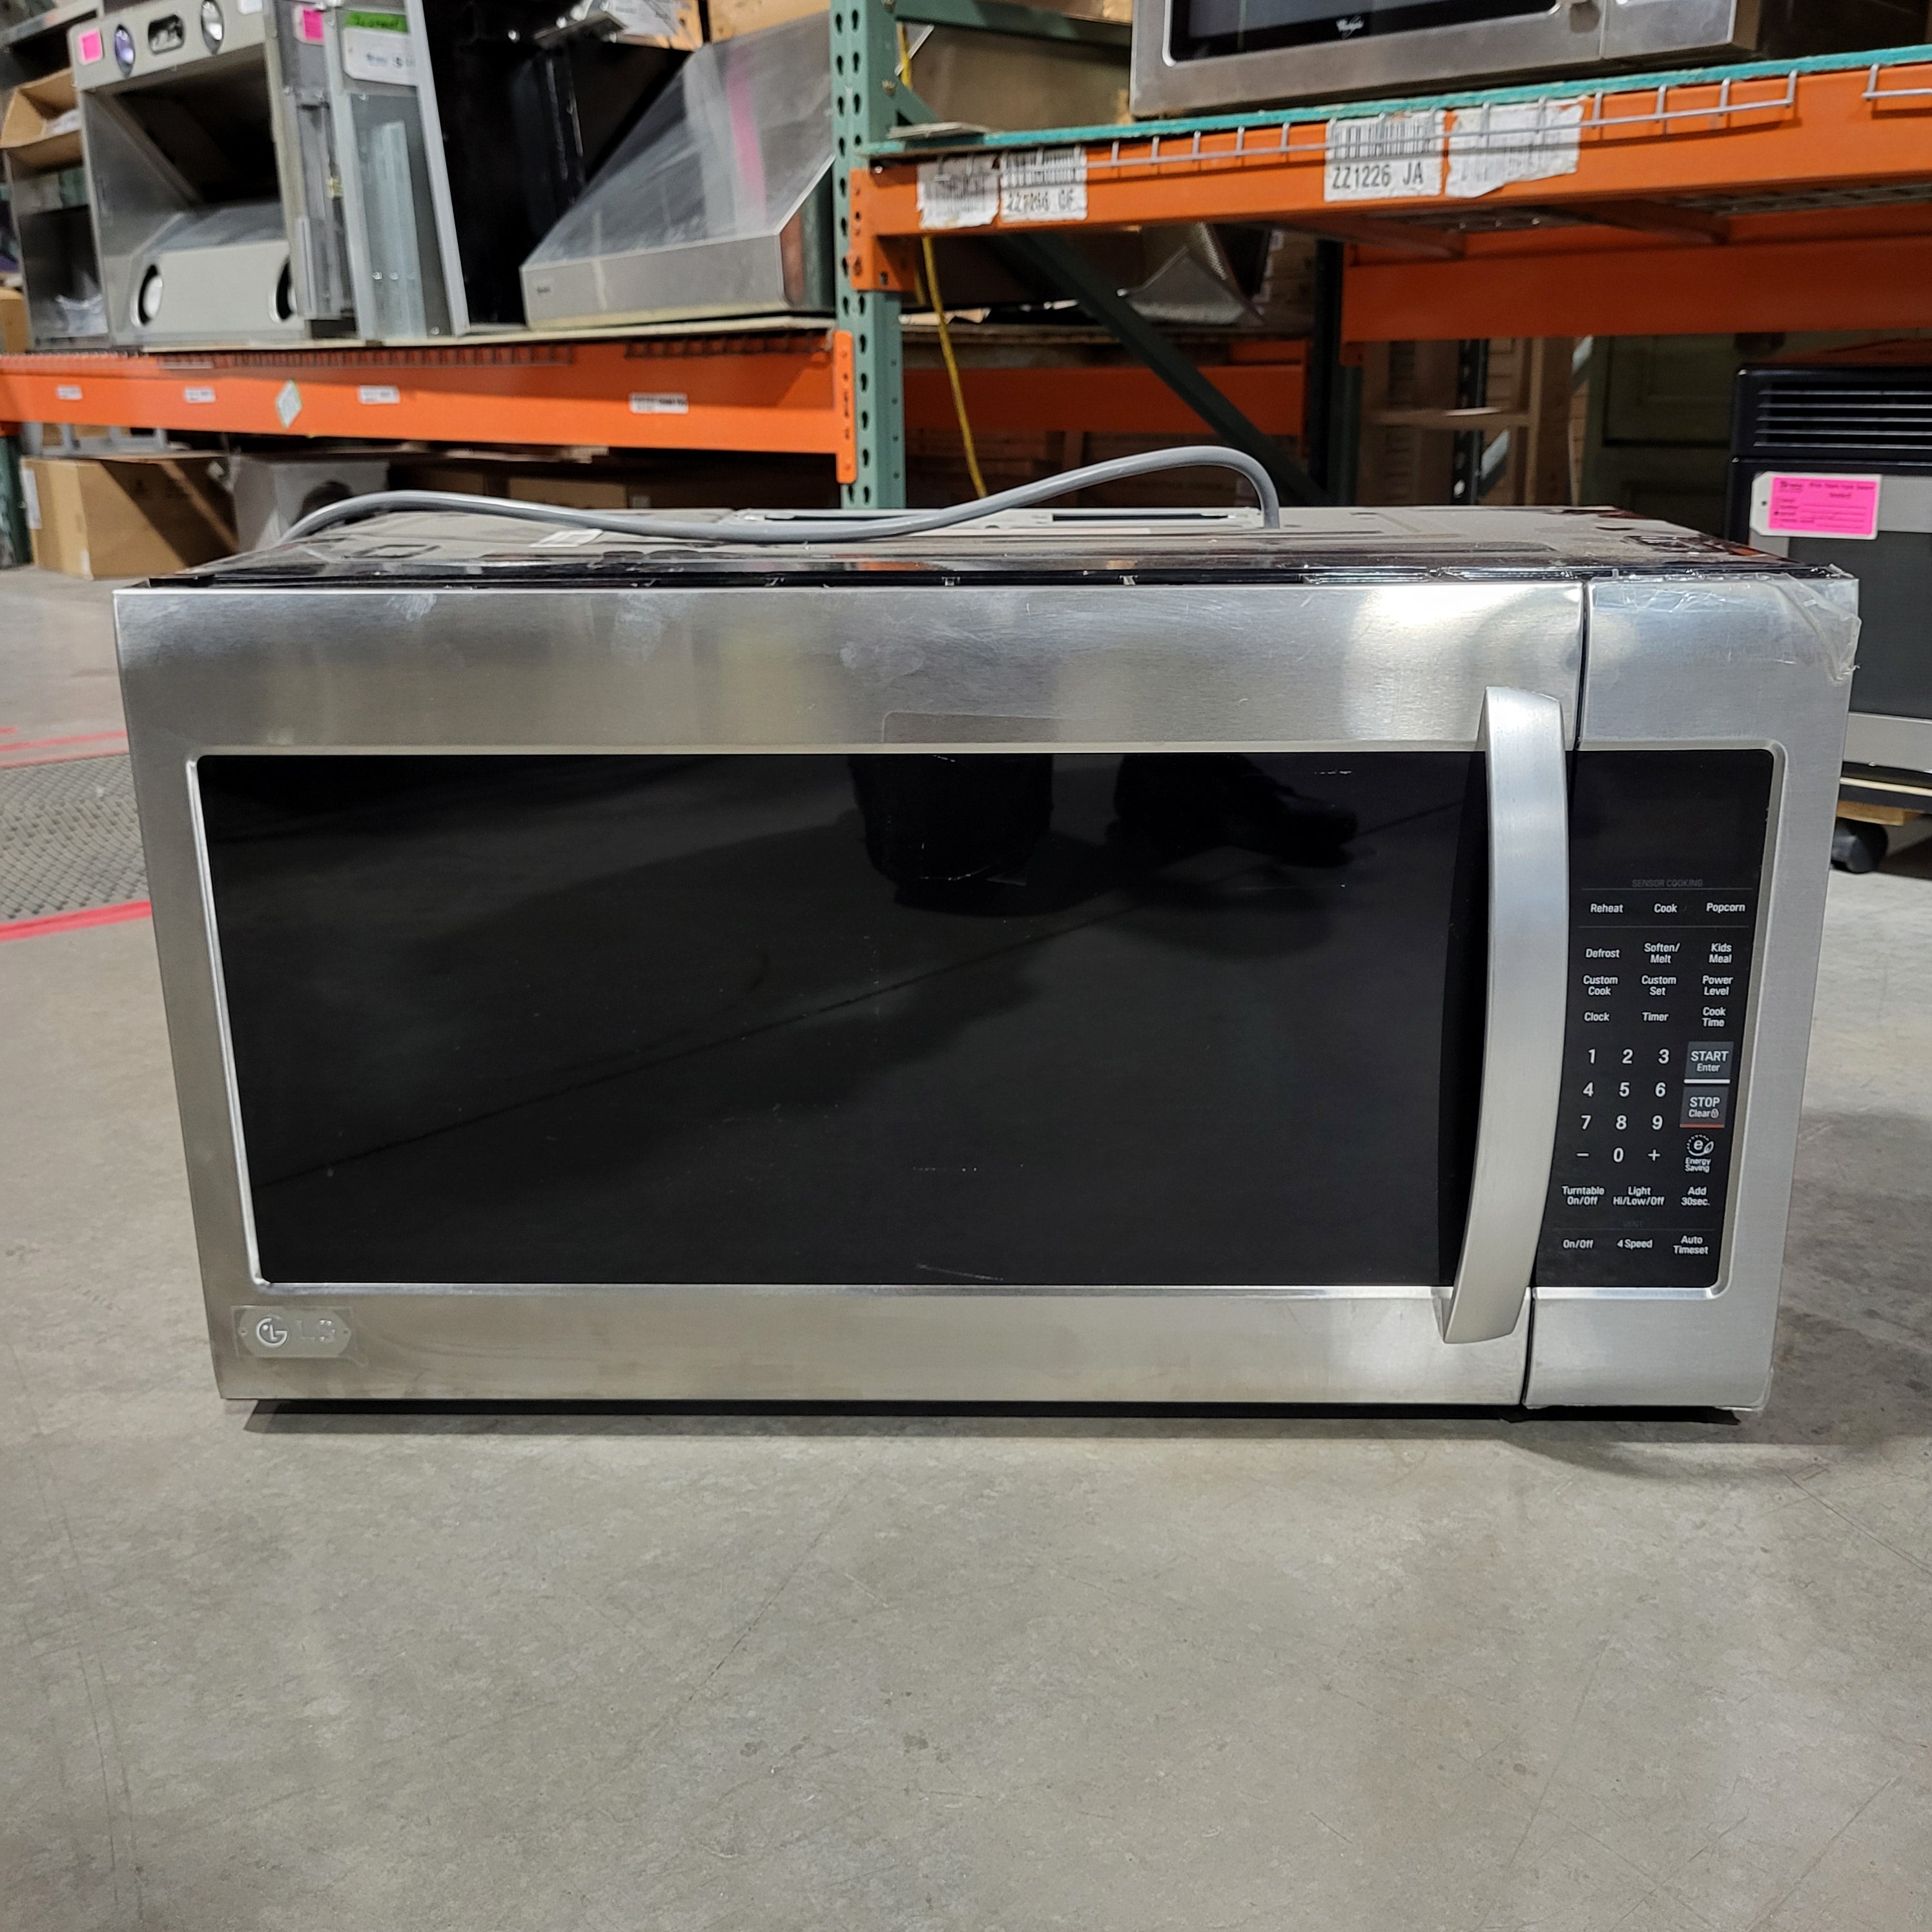 L1822 LG 2.0 cu.ft Over the Range Stainless Microwave LMV2031ST	/204TAXTAM338